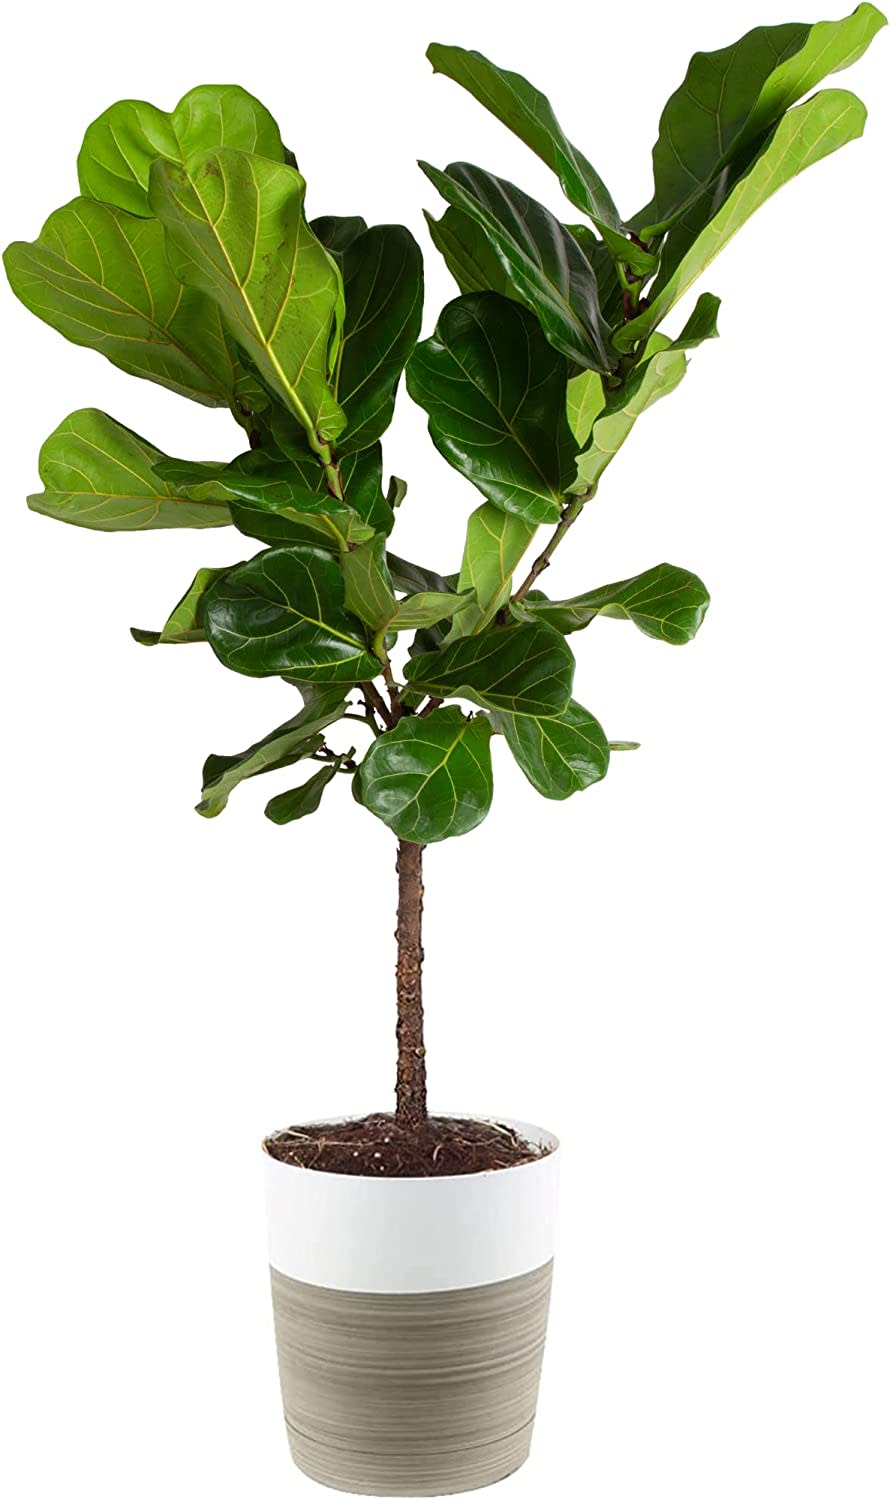 Indoor Plants Are Up To 49% Off At Amazon Today